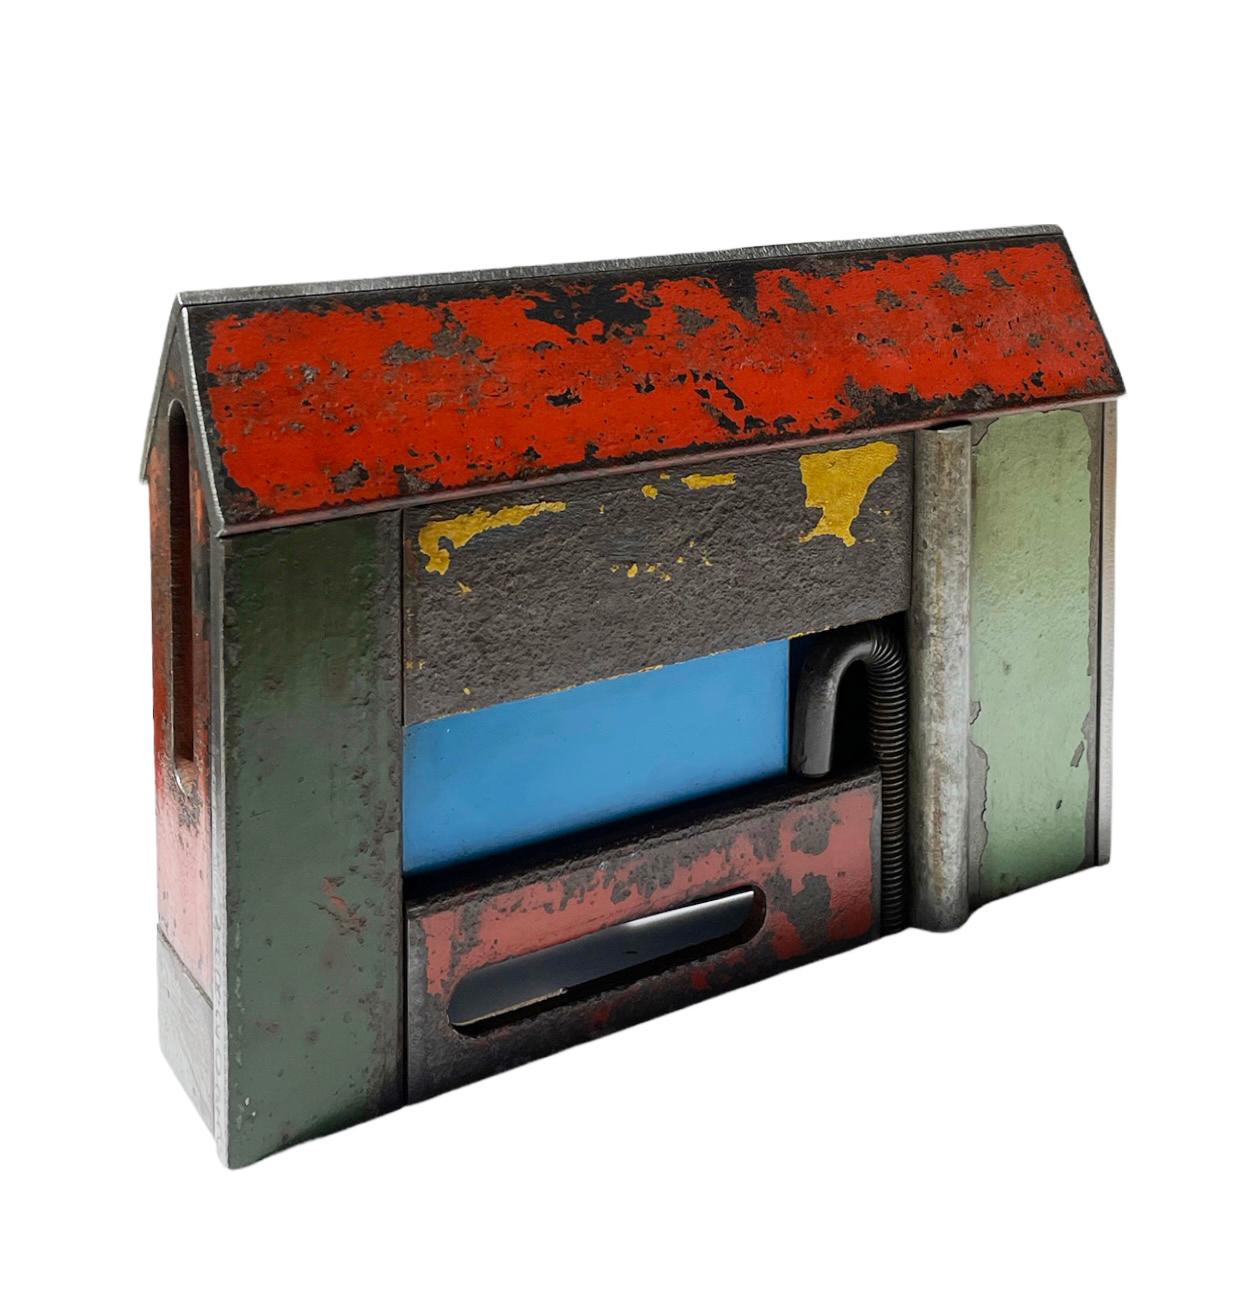 Folk Art Jim Rose Barn House Structure, Welded Steel Sculpture Made with Salvaged Steel